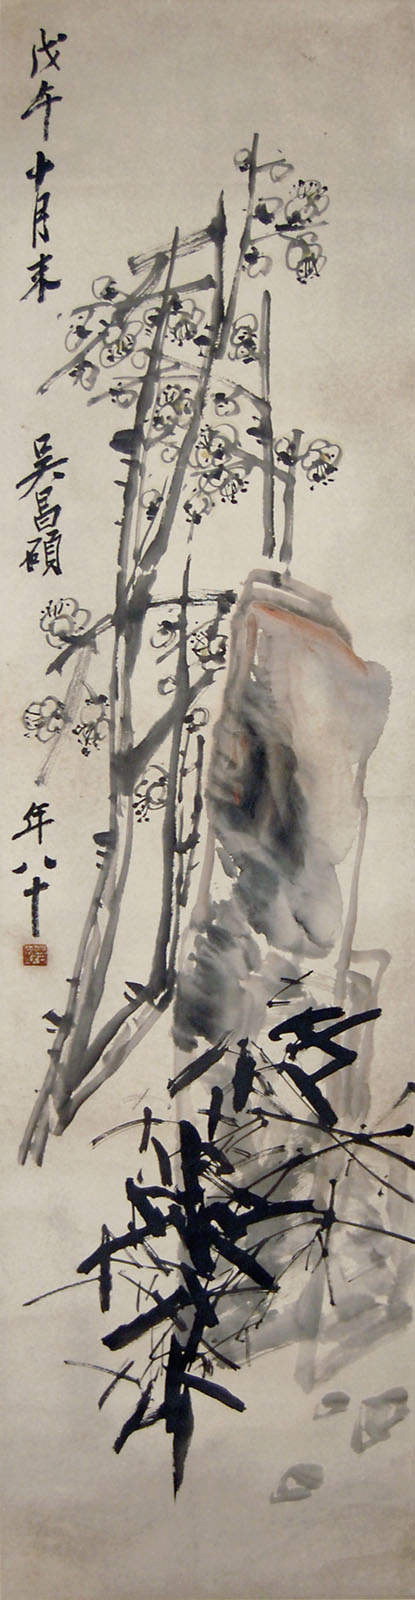 ???(1844 - 1927)?????????????: ????? ????????:(??)Wu ChangshuoBamboo and OrchidsHanging Scroll,Ink &